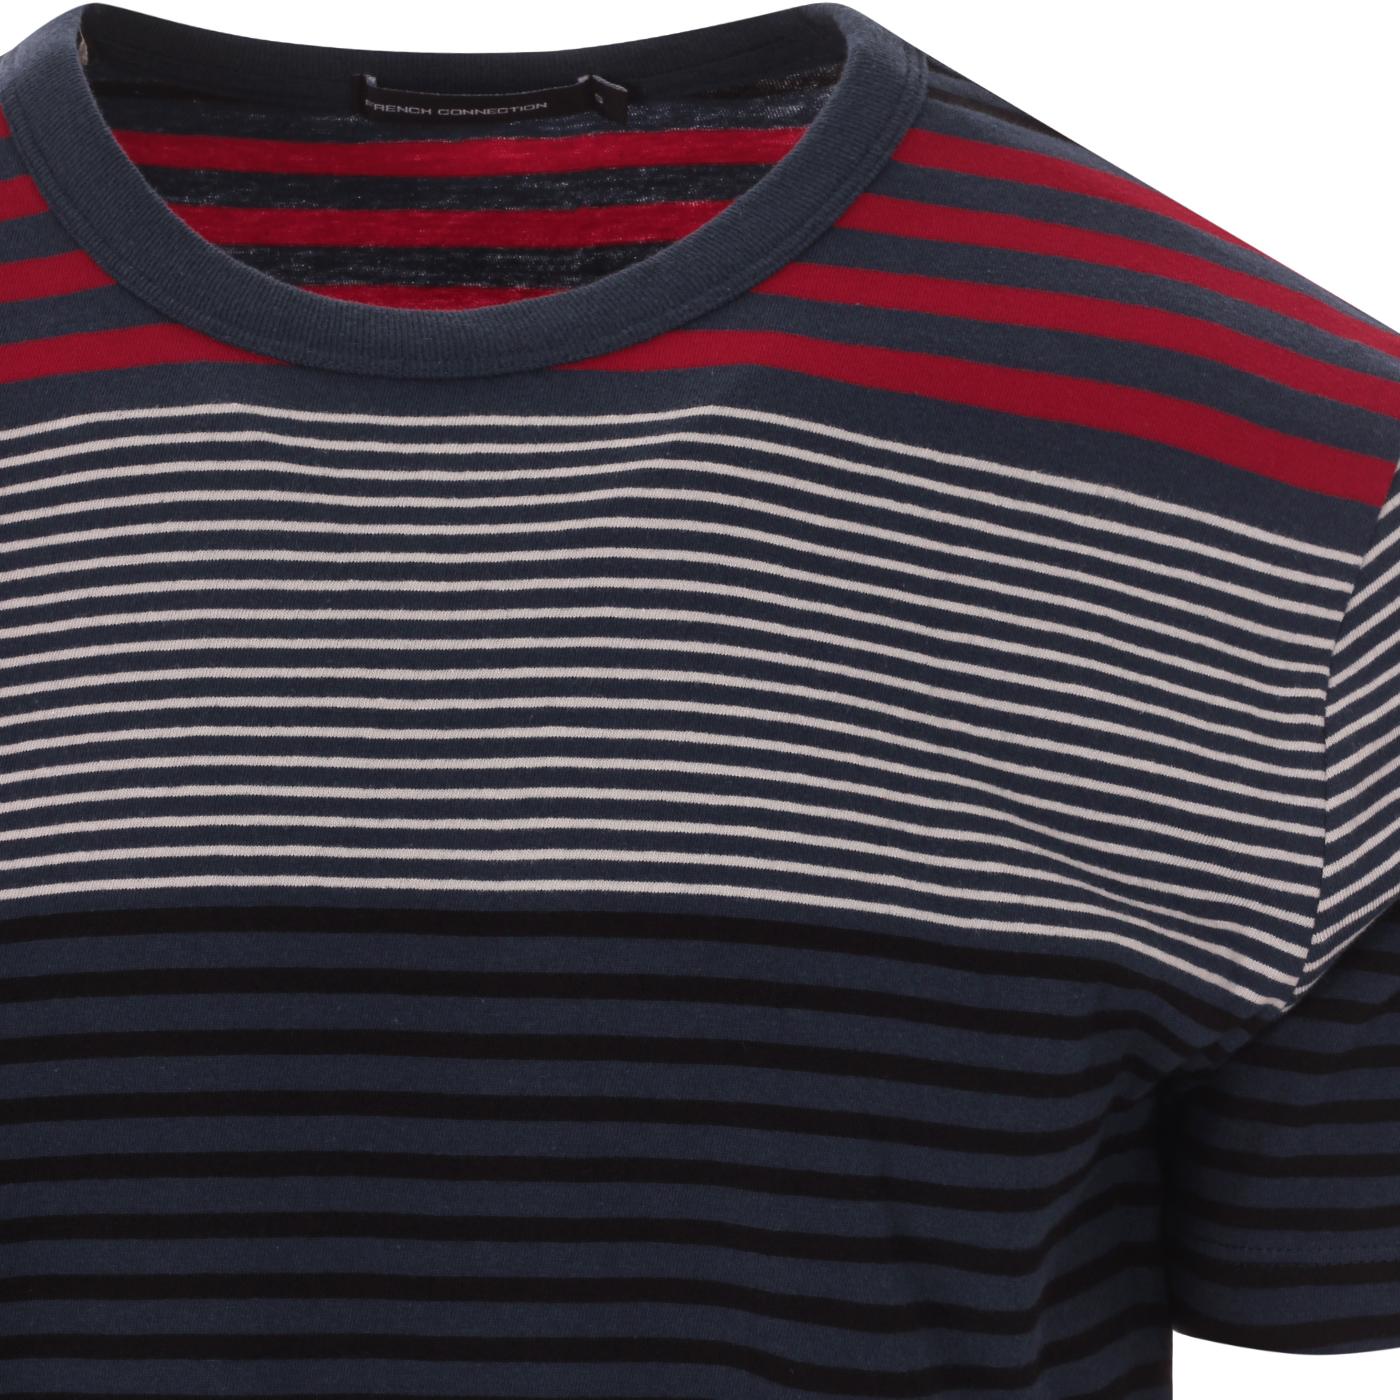 FRENCH CONNECTION Dragged Stripe Men's Retro T-shirt